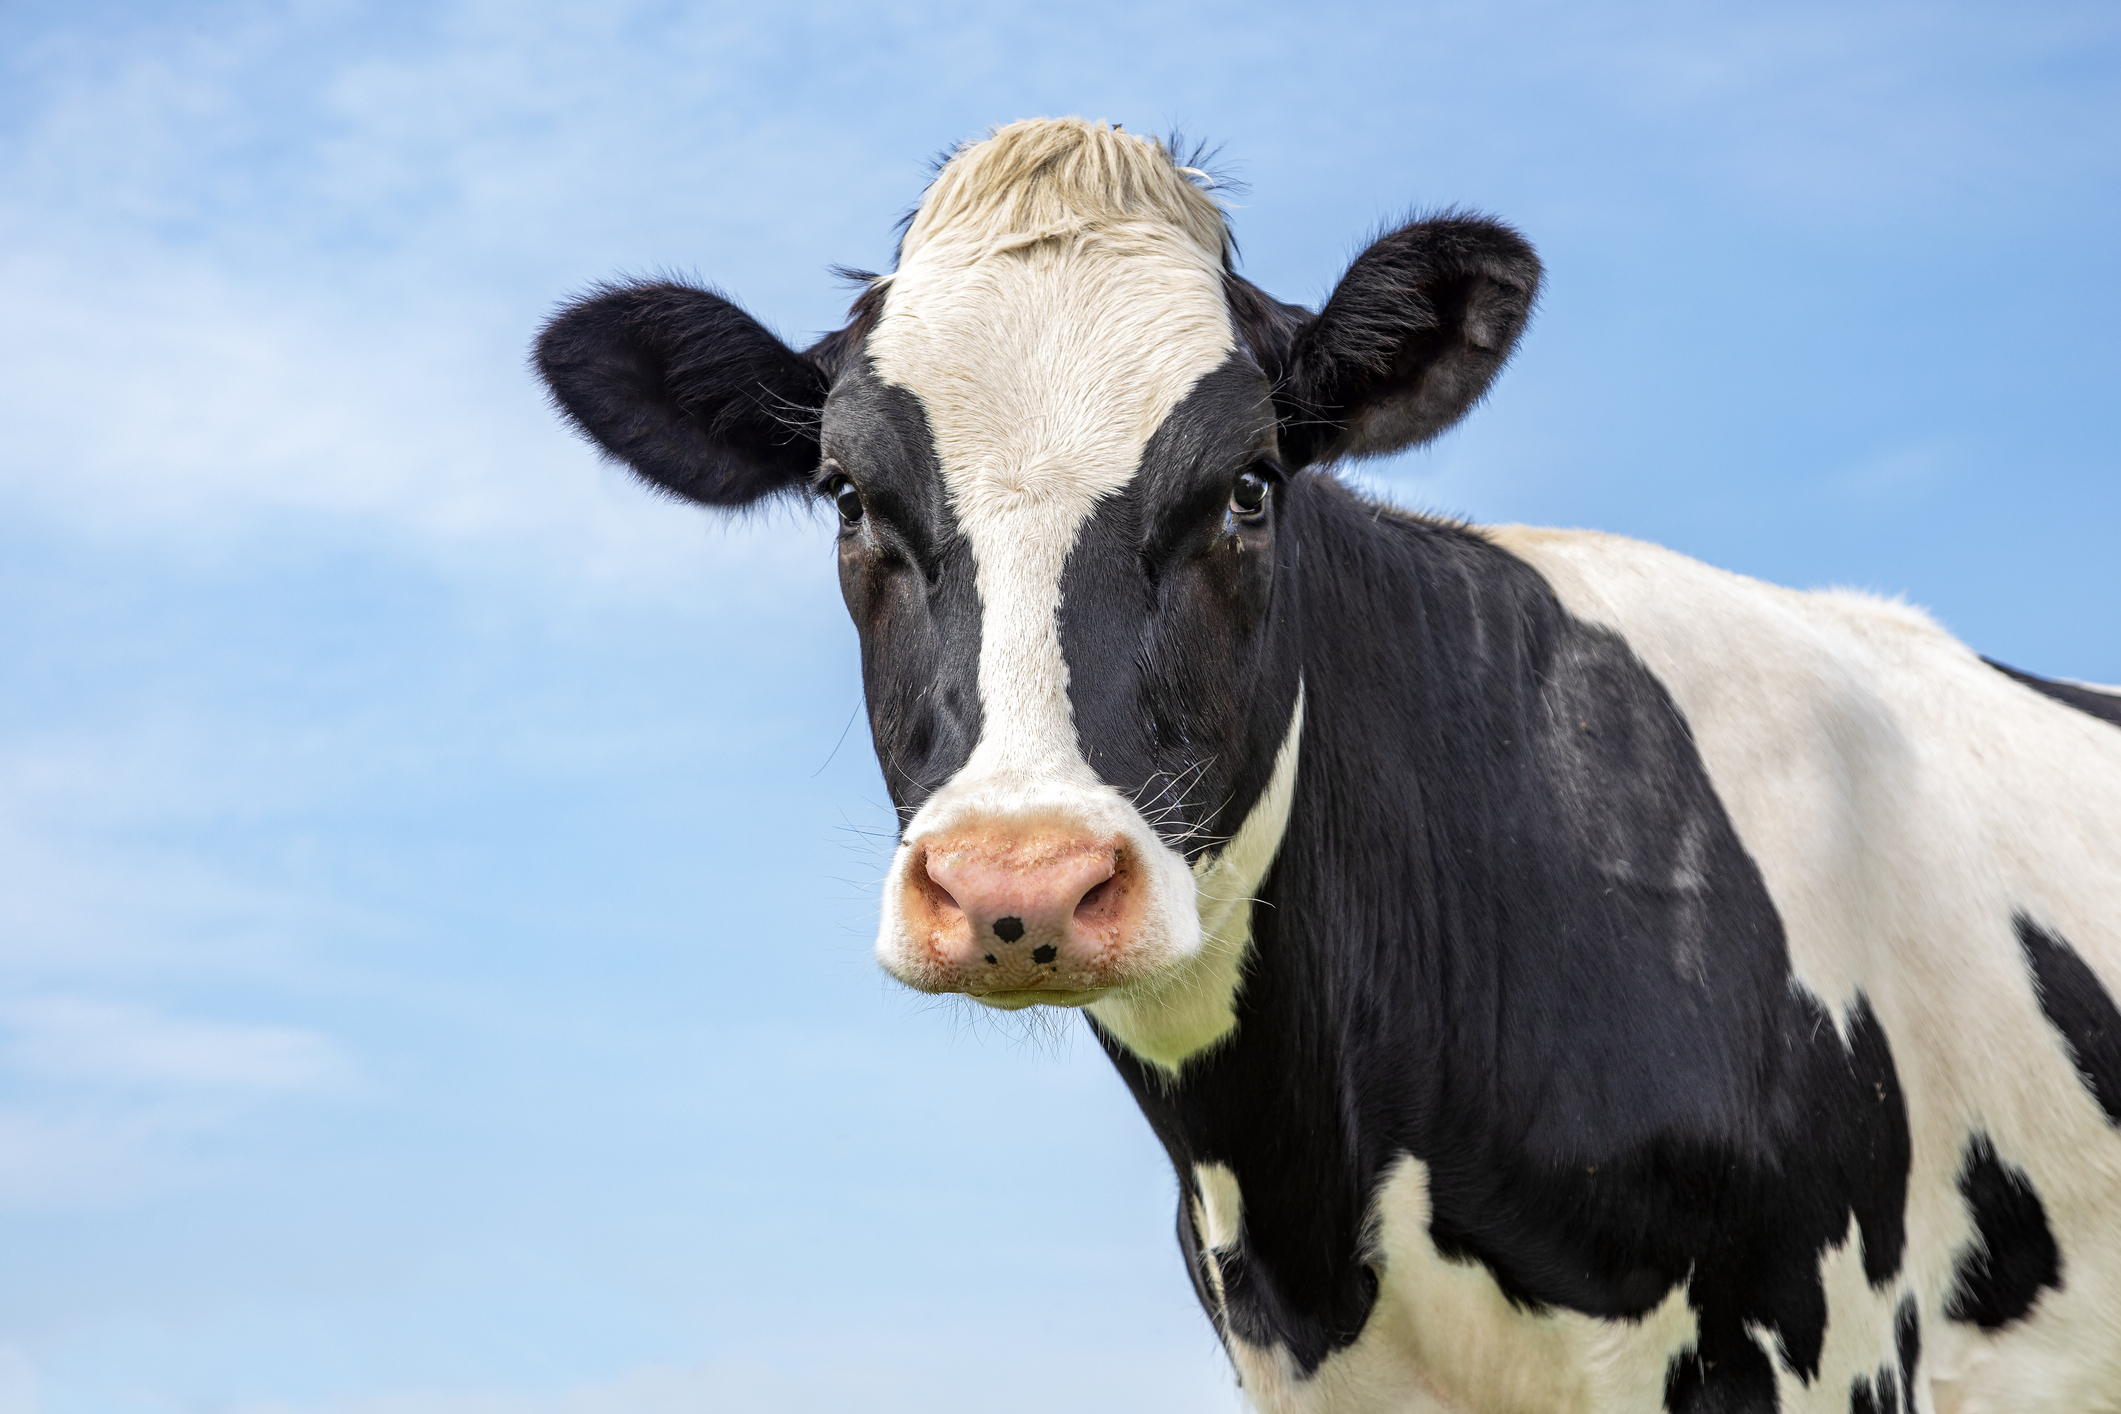 Portrait of the head of an adult black and white cow, gentle look, pink nose, in front of a blue sky.